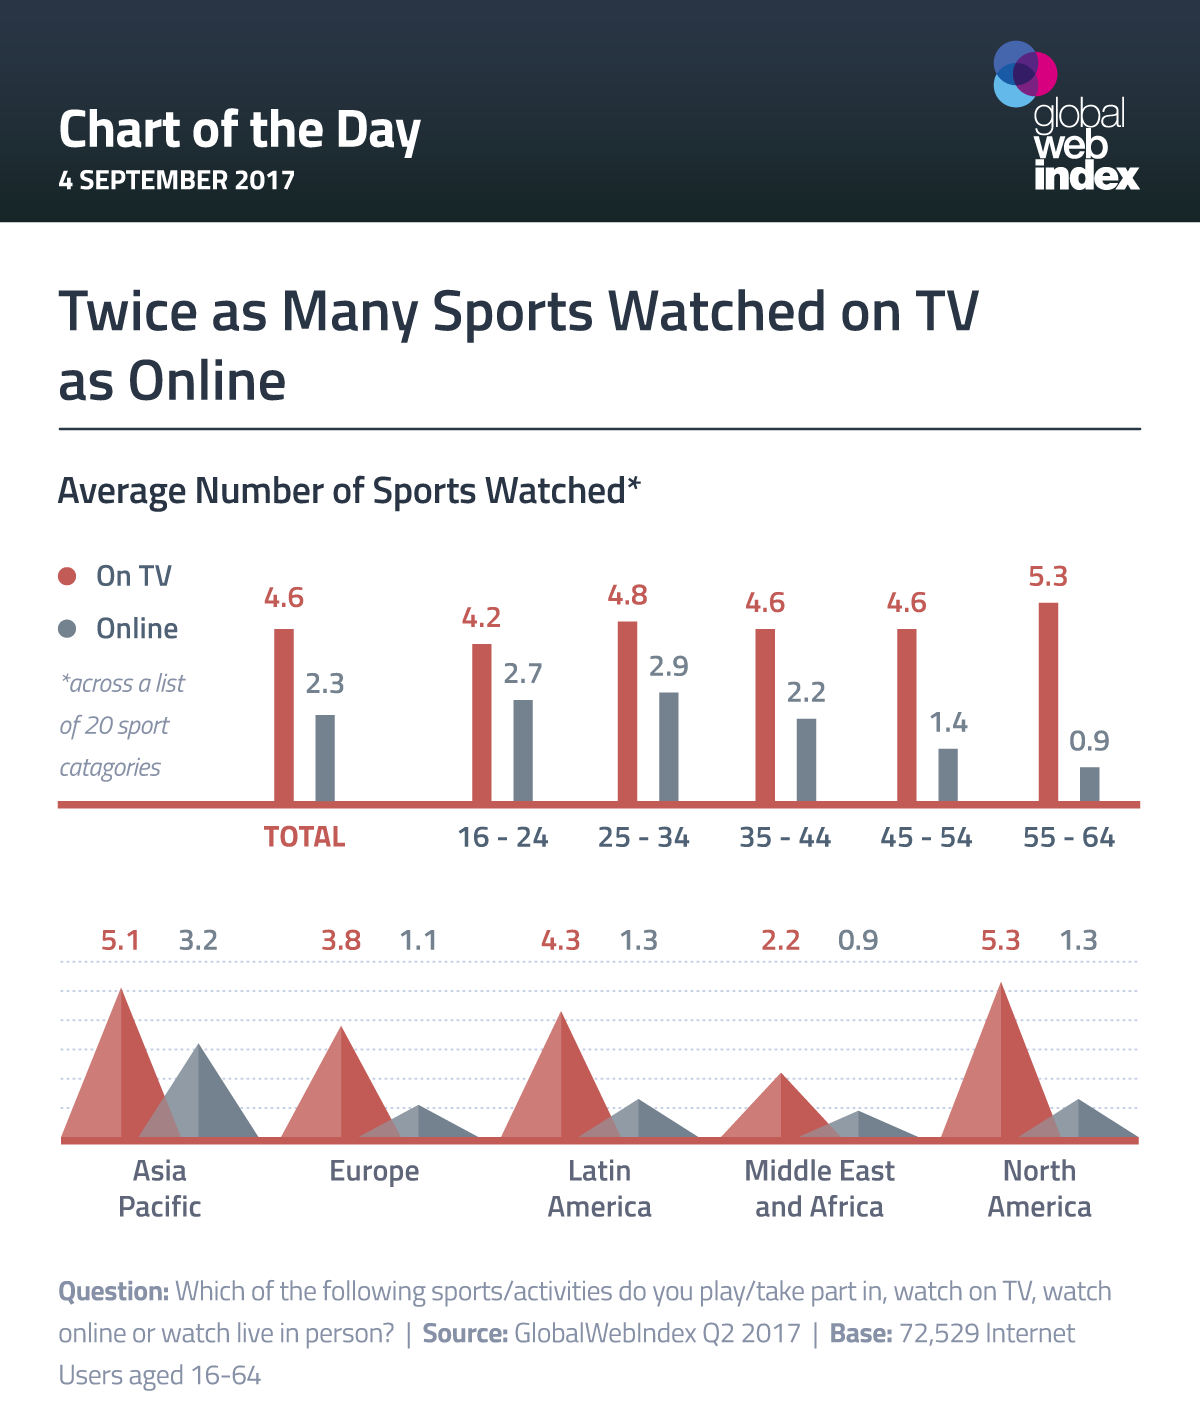 Twice as Many Sports Watched on TV as Online